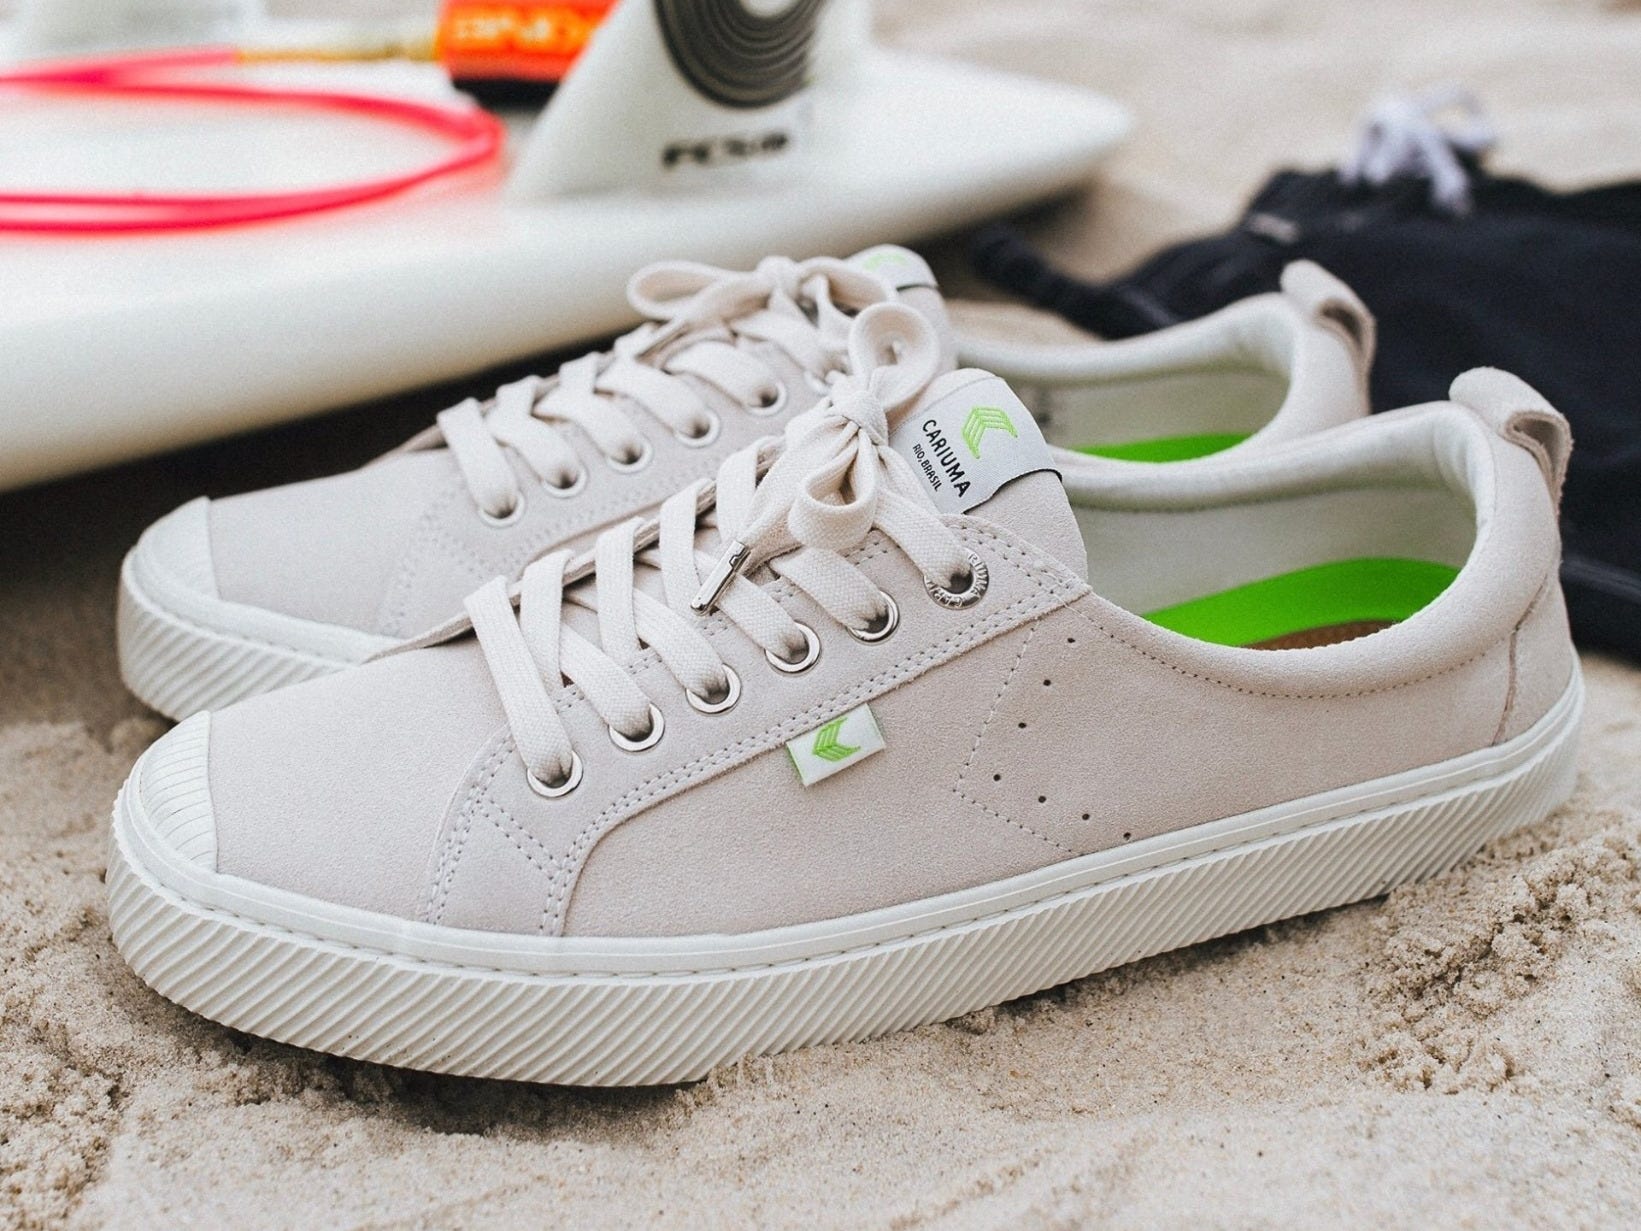 Up-and-coming startup Cariuma makes sustainable sneakers that combine ...